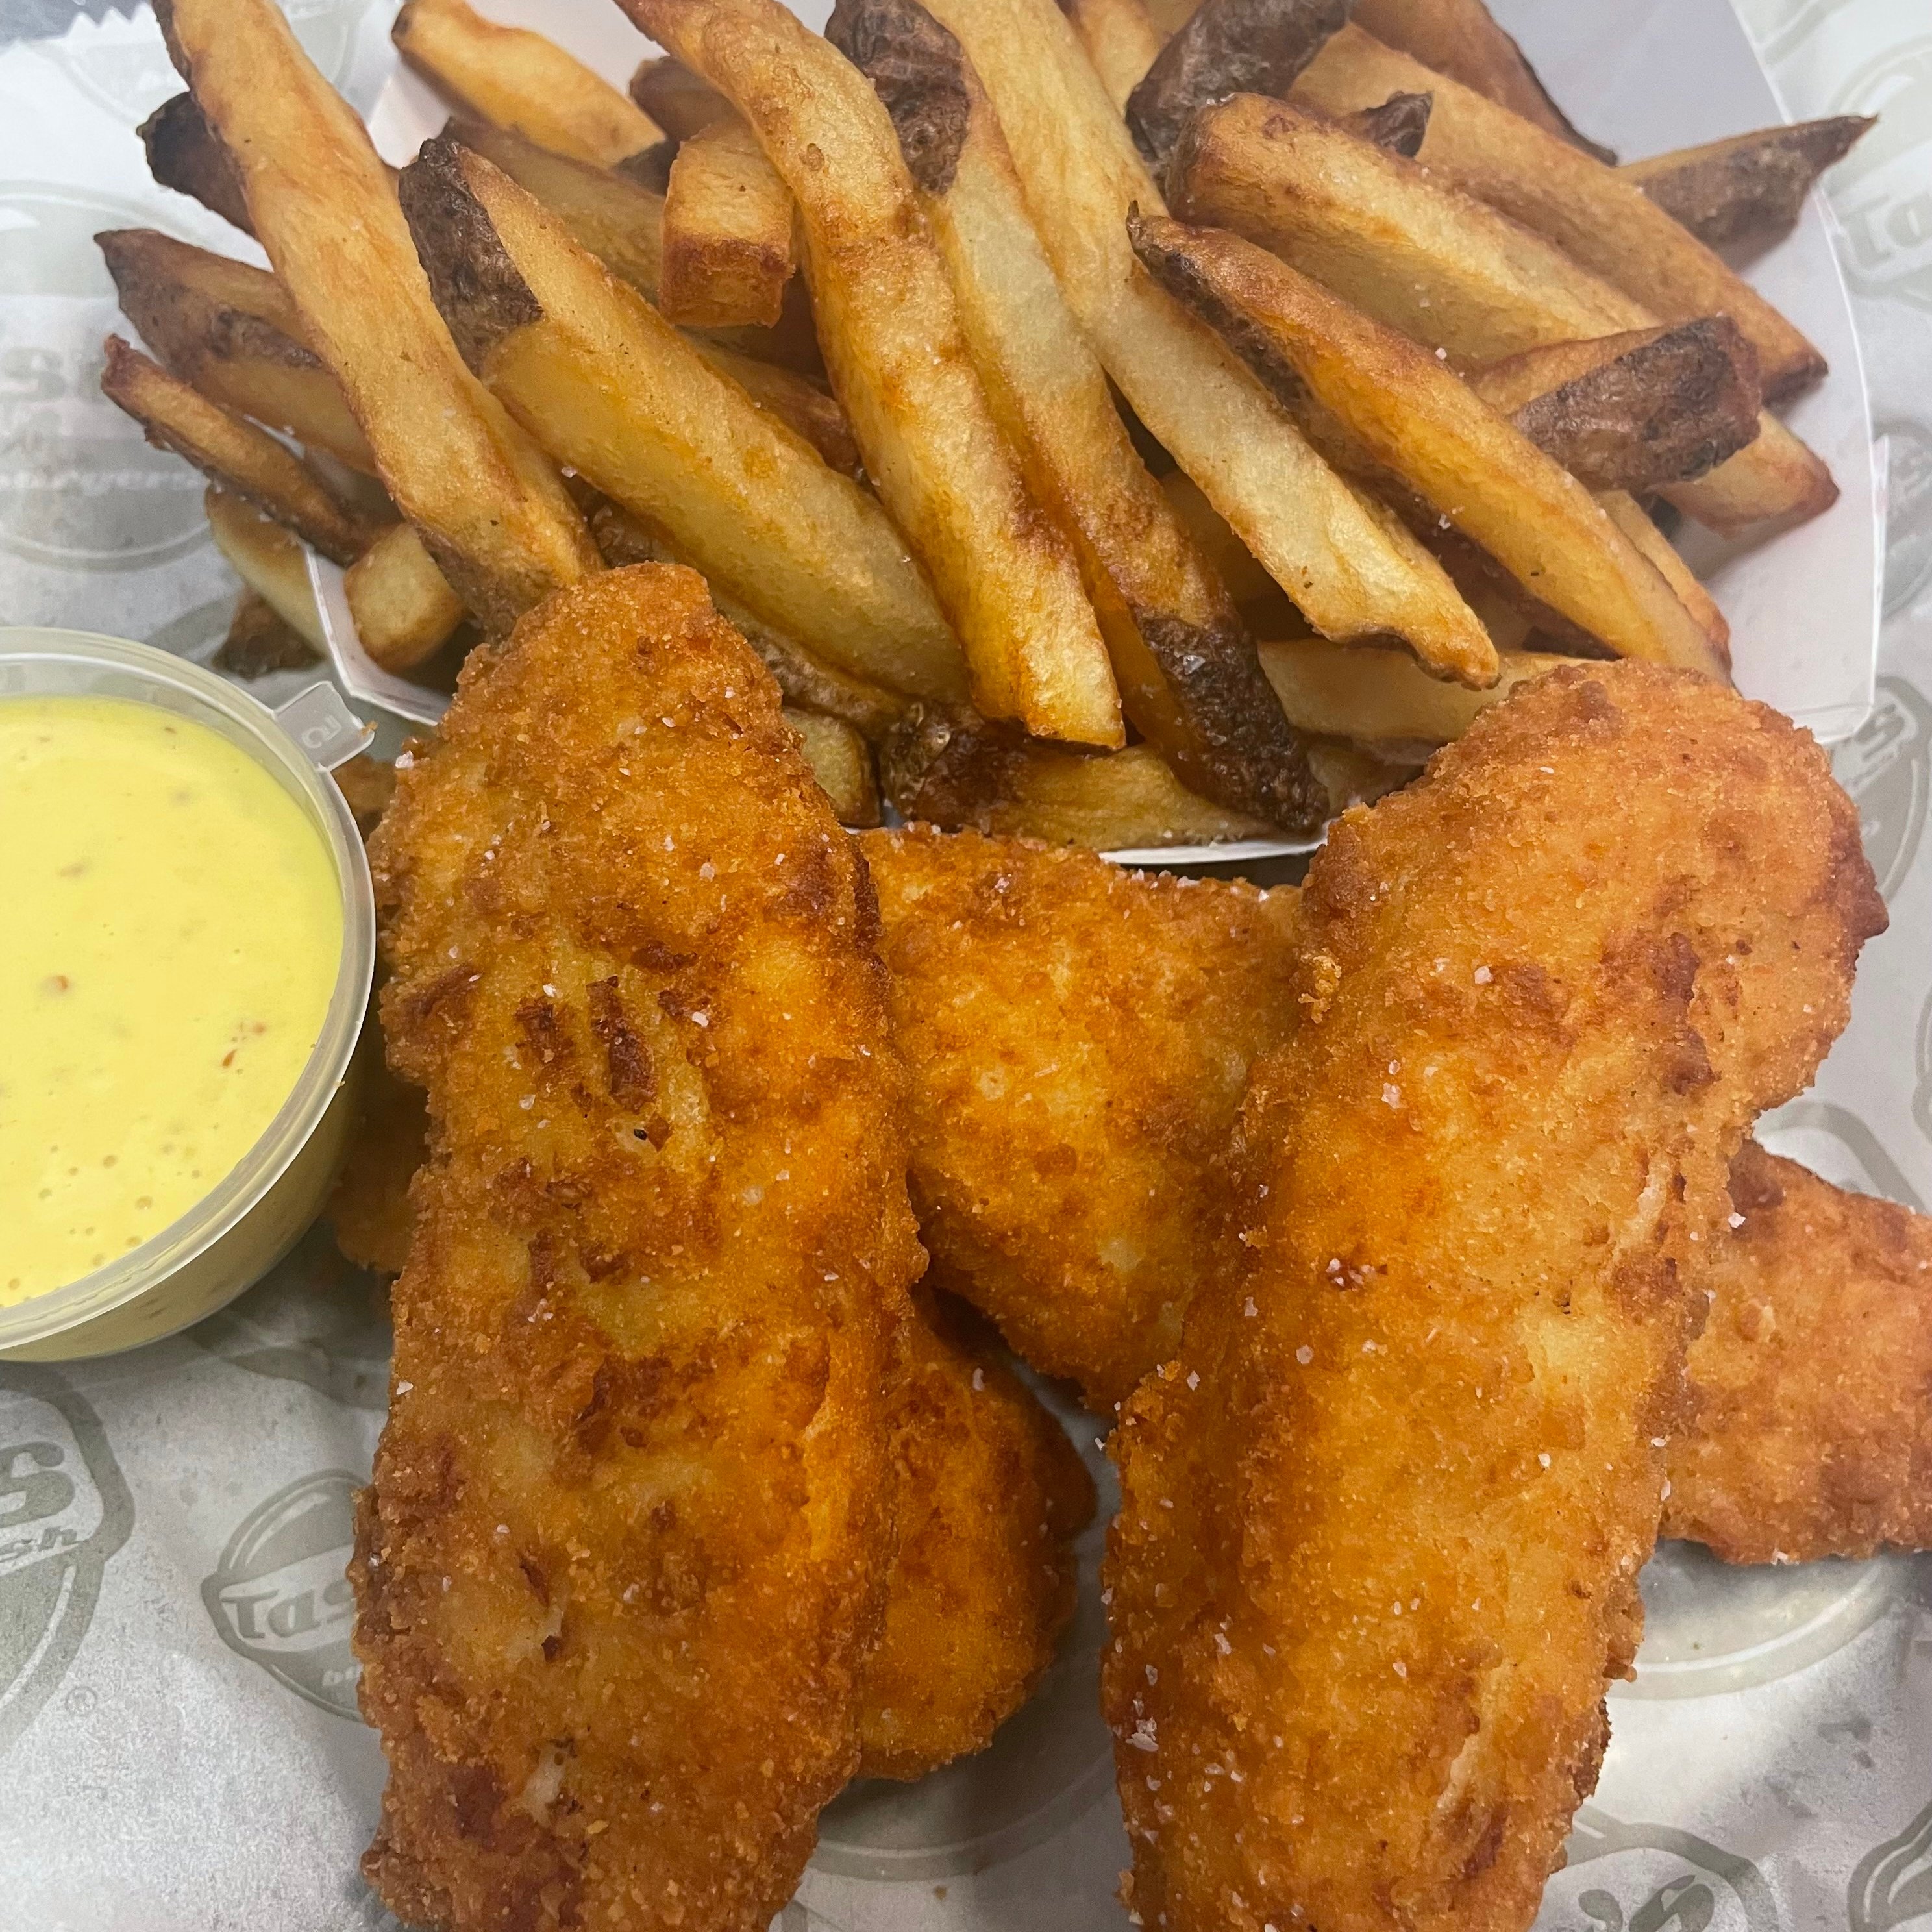 Delicious Chicken Tenders at Our Burger Joint